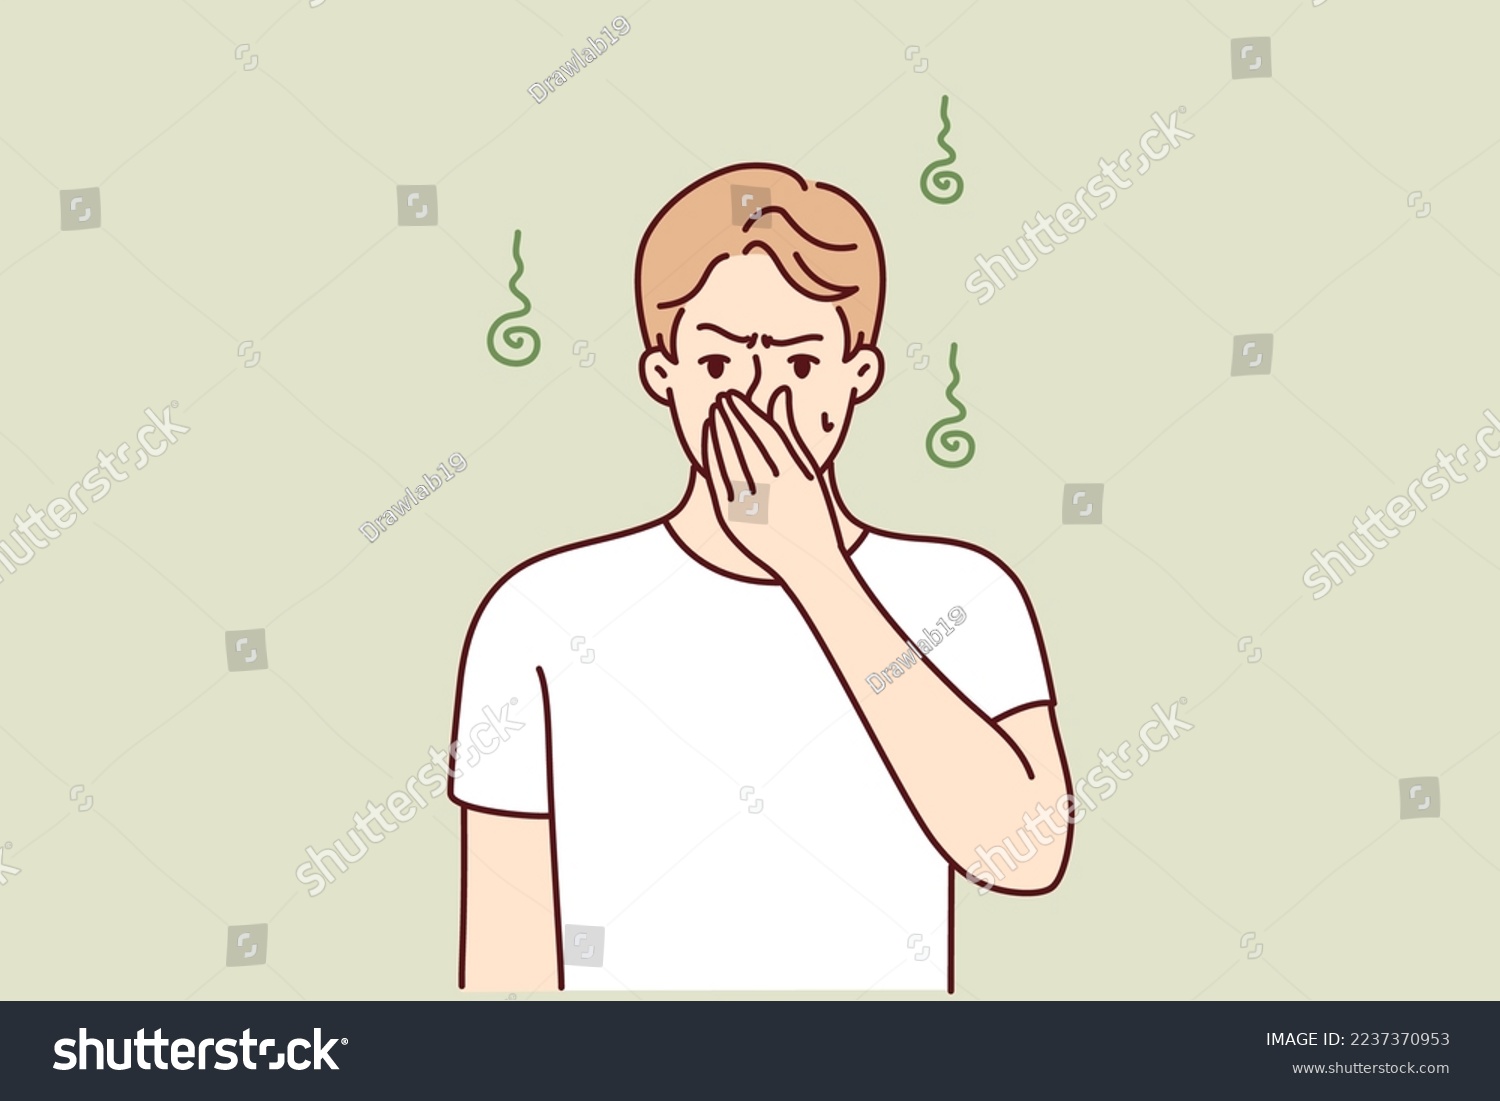 Dissatisfied man pinching nose with hand while suffering from unpleasant smell sweat. Guy is experiencing discomfort due to non-compliance with hygiene standards or health problems. Flat vector image #2237370953